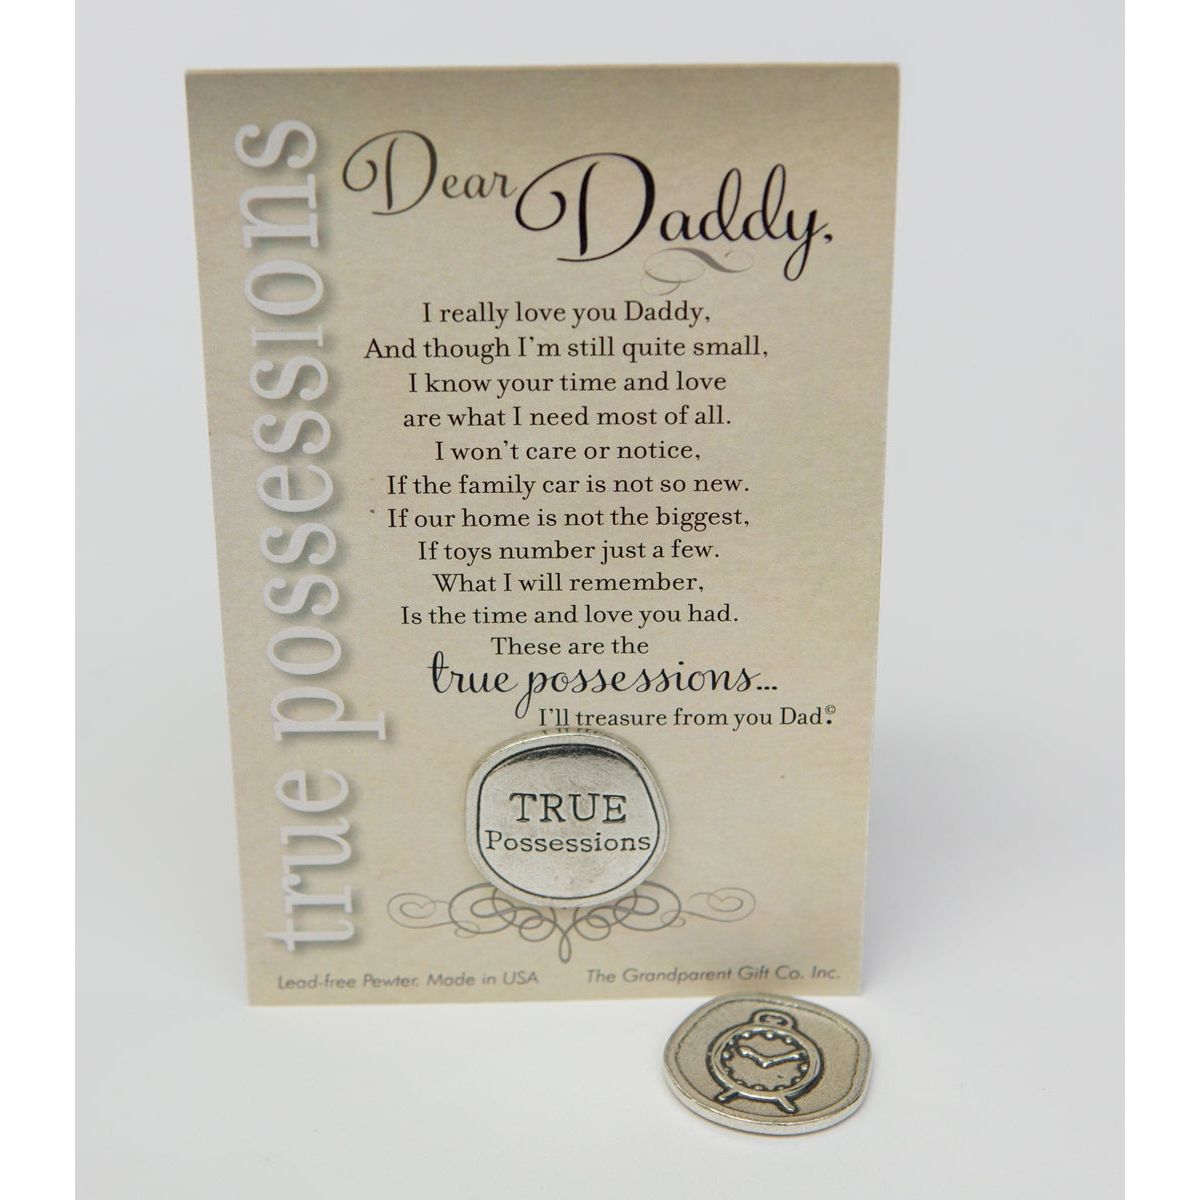 Gift for Dad: Handmade pewter coin with "TRUE Possessions" on one side and a clock on the other, packaged in a clear bag with "Dear Daddy" poem.